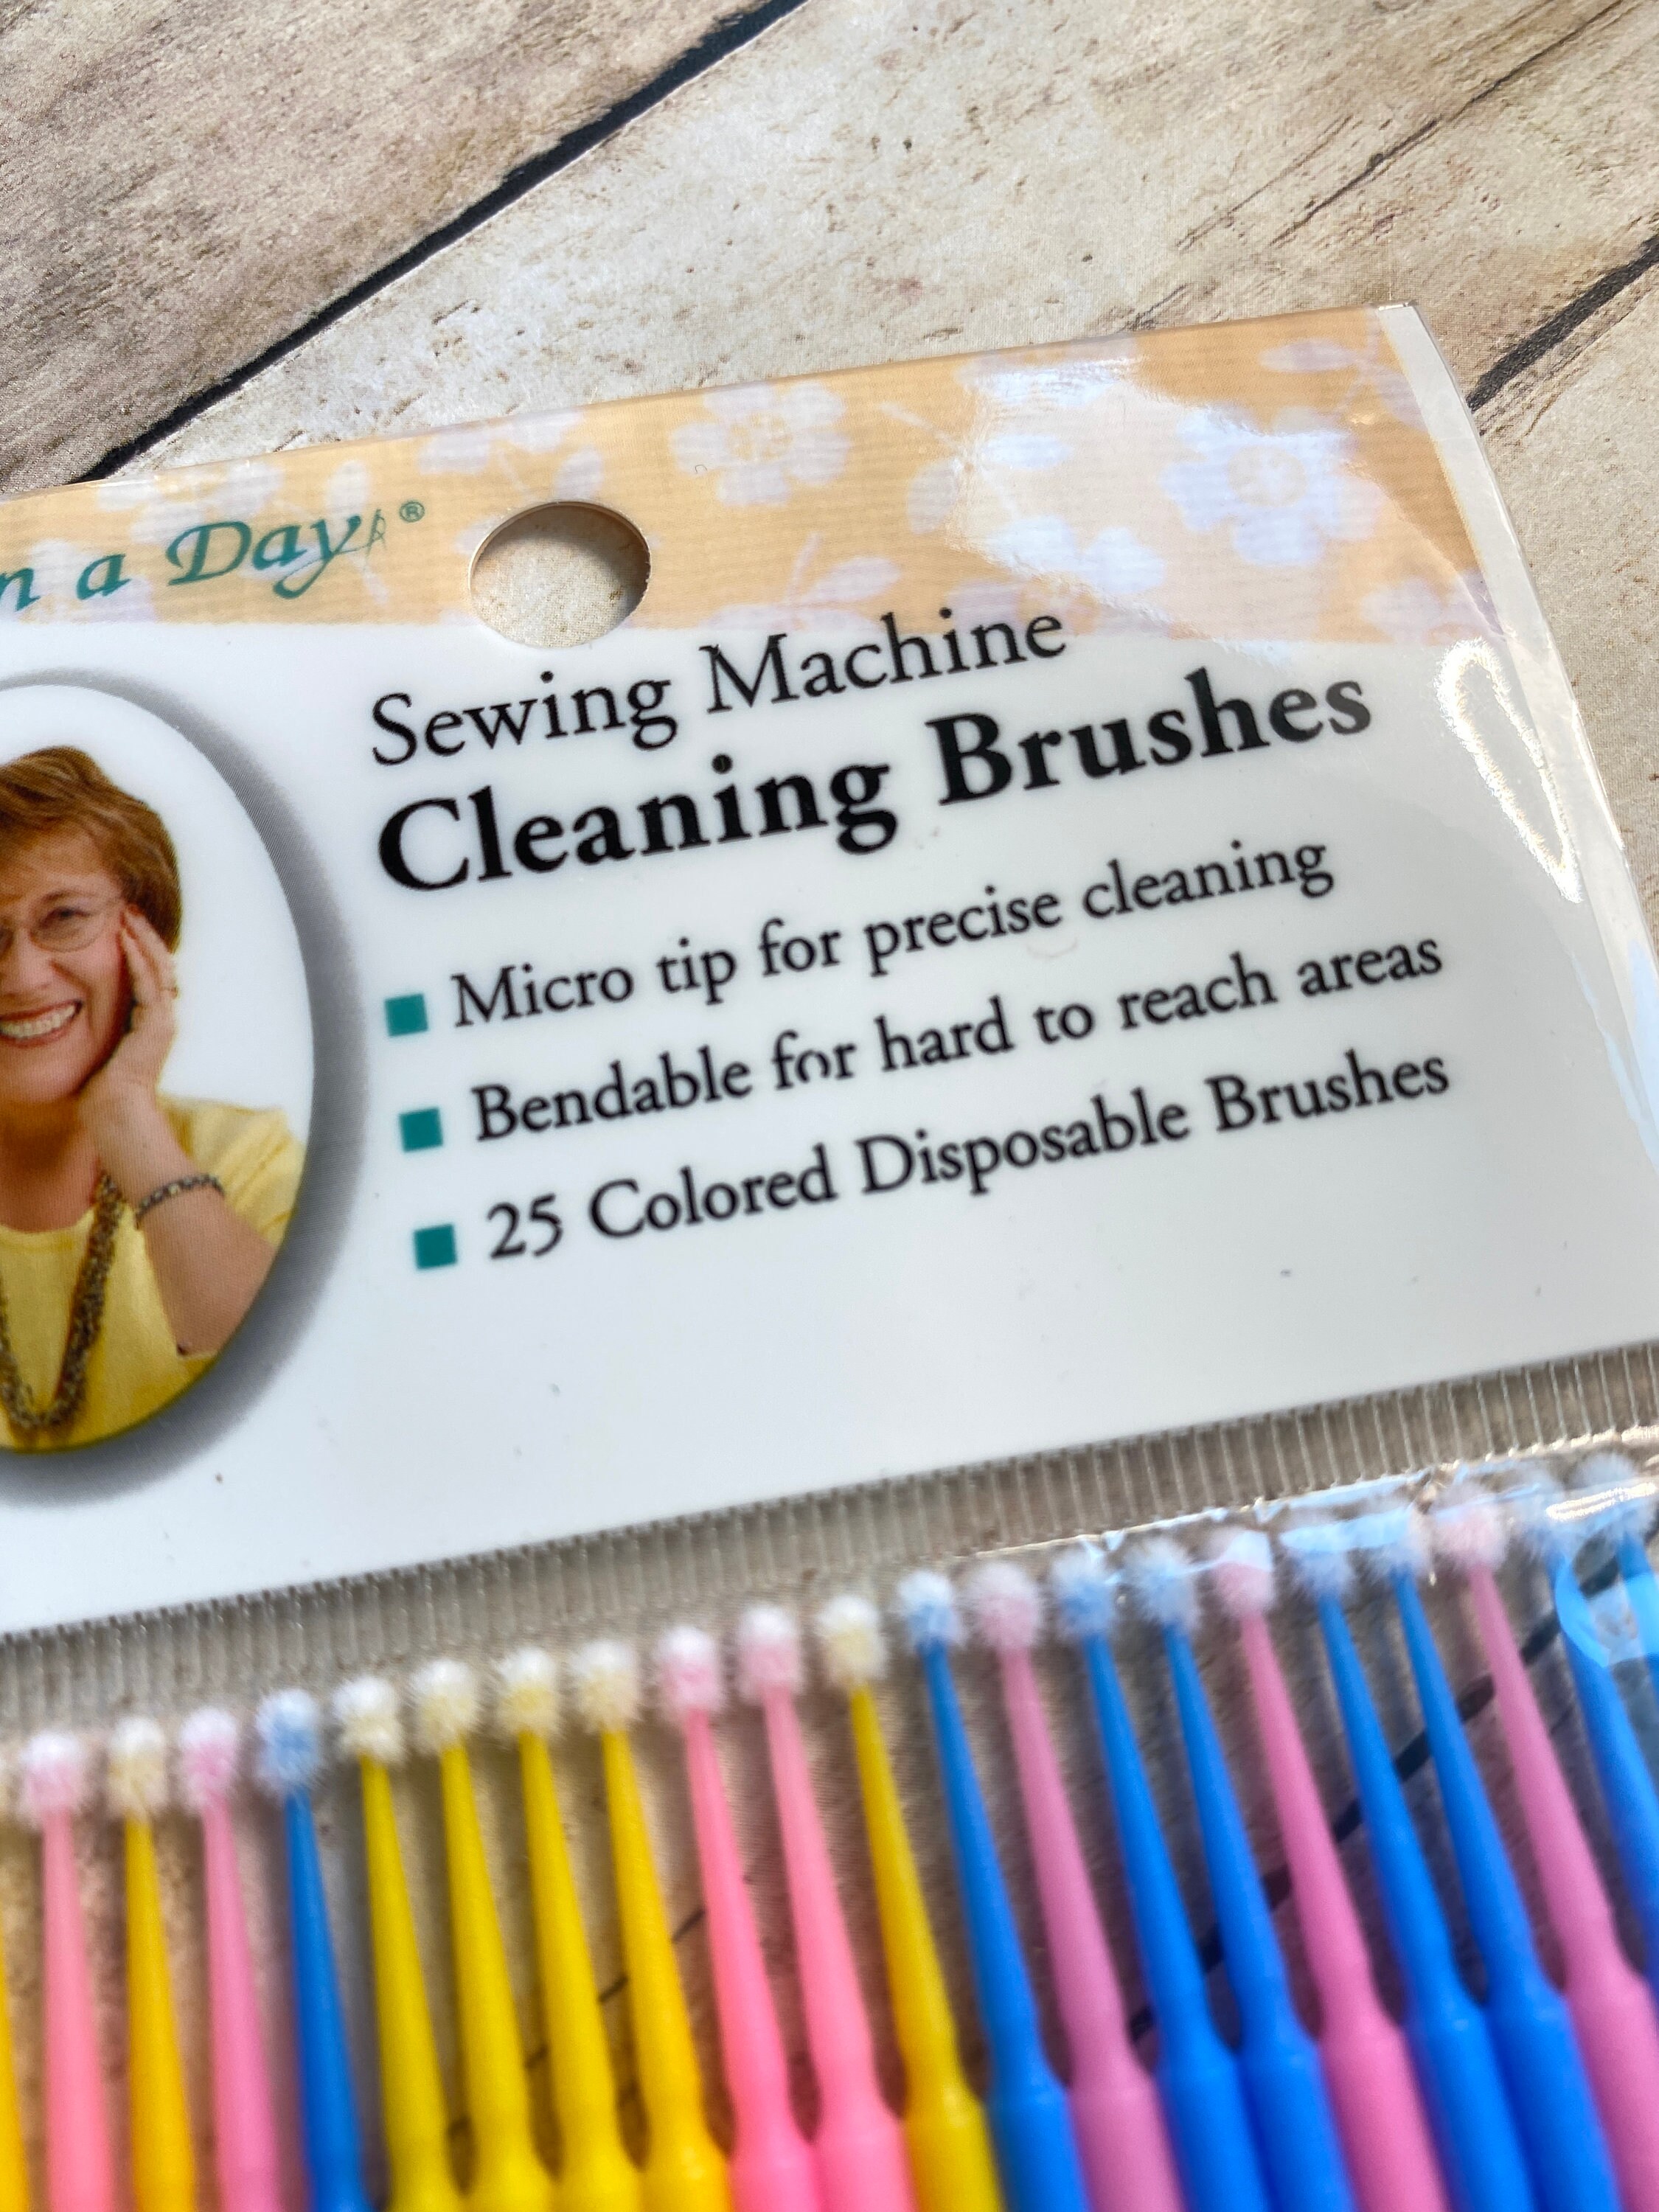 Sewing Machine Cleaning Brushes